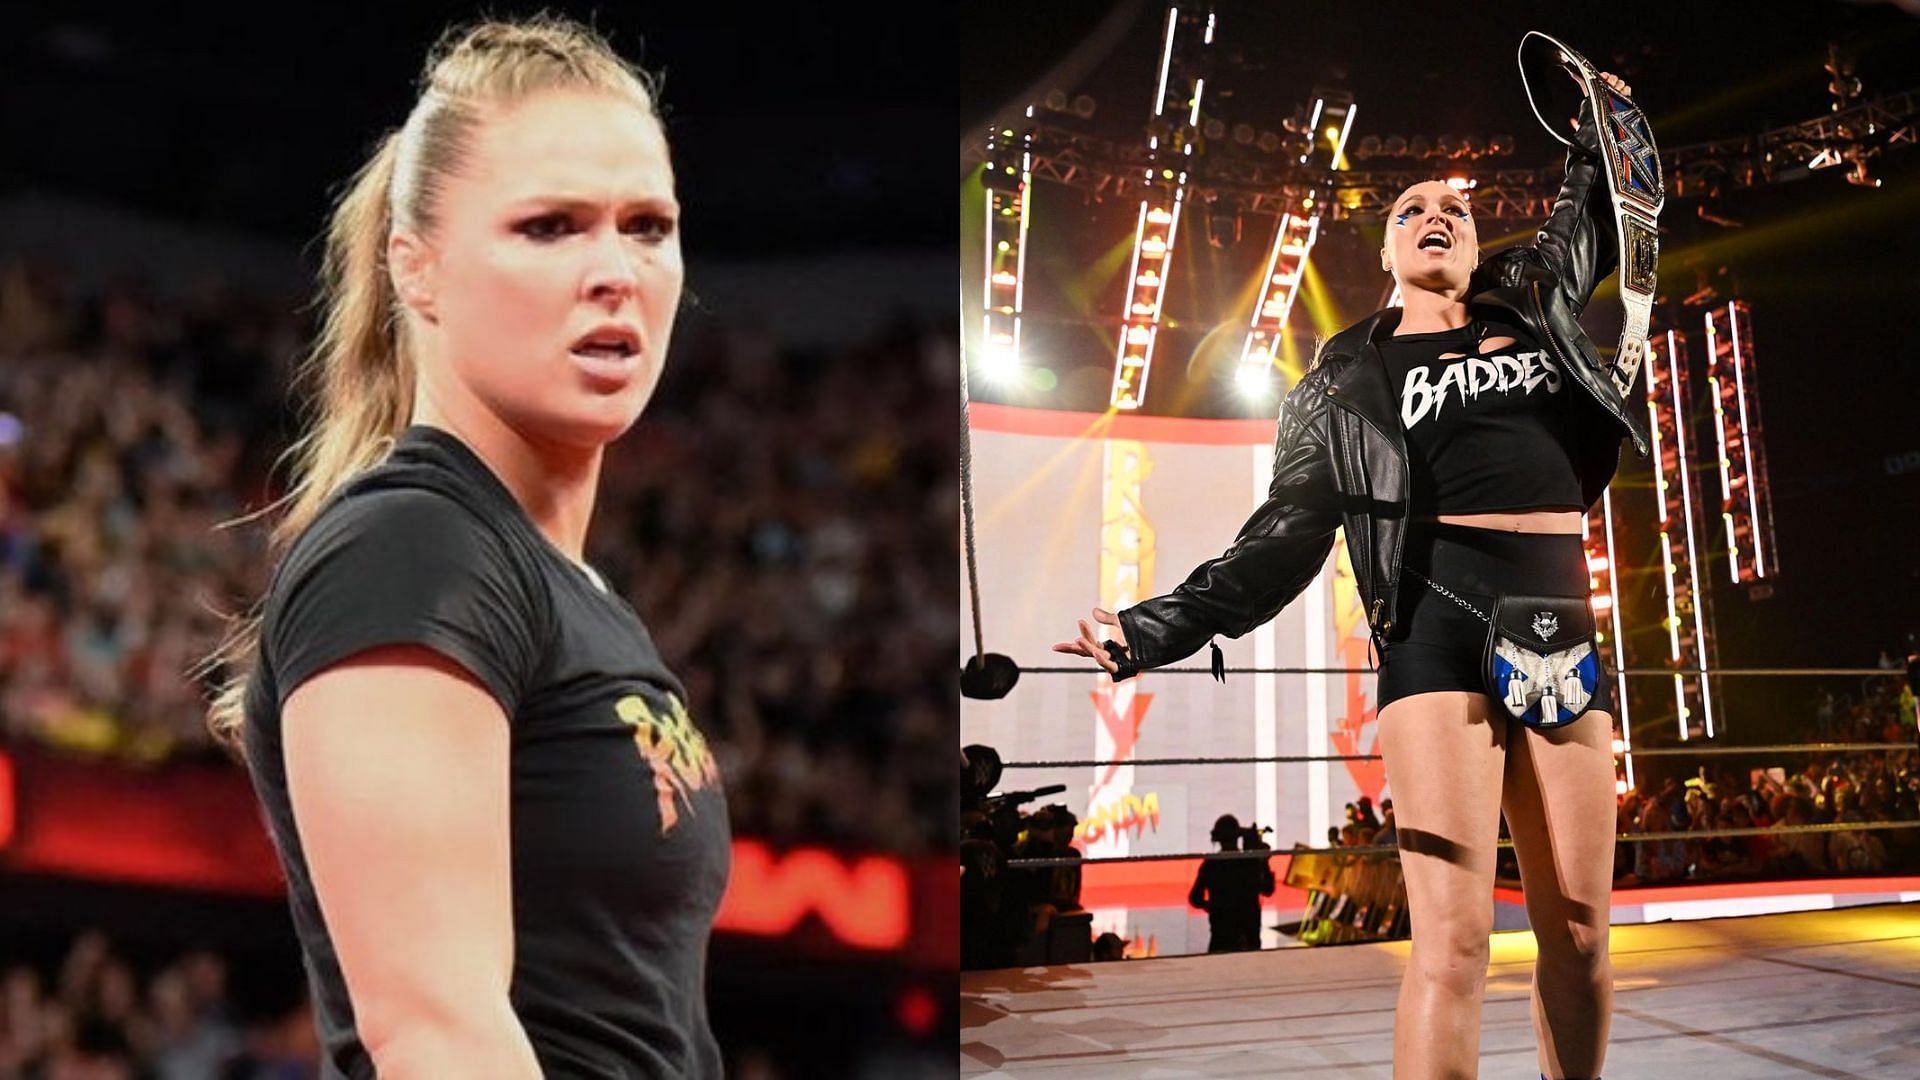 Ronda Rousey recently returned to professional wrestling after departing WWE